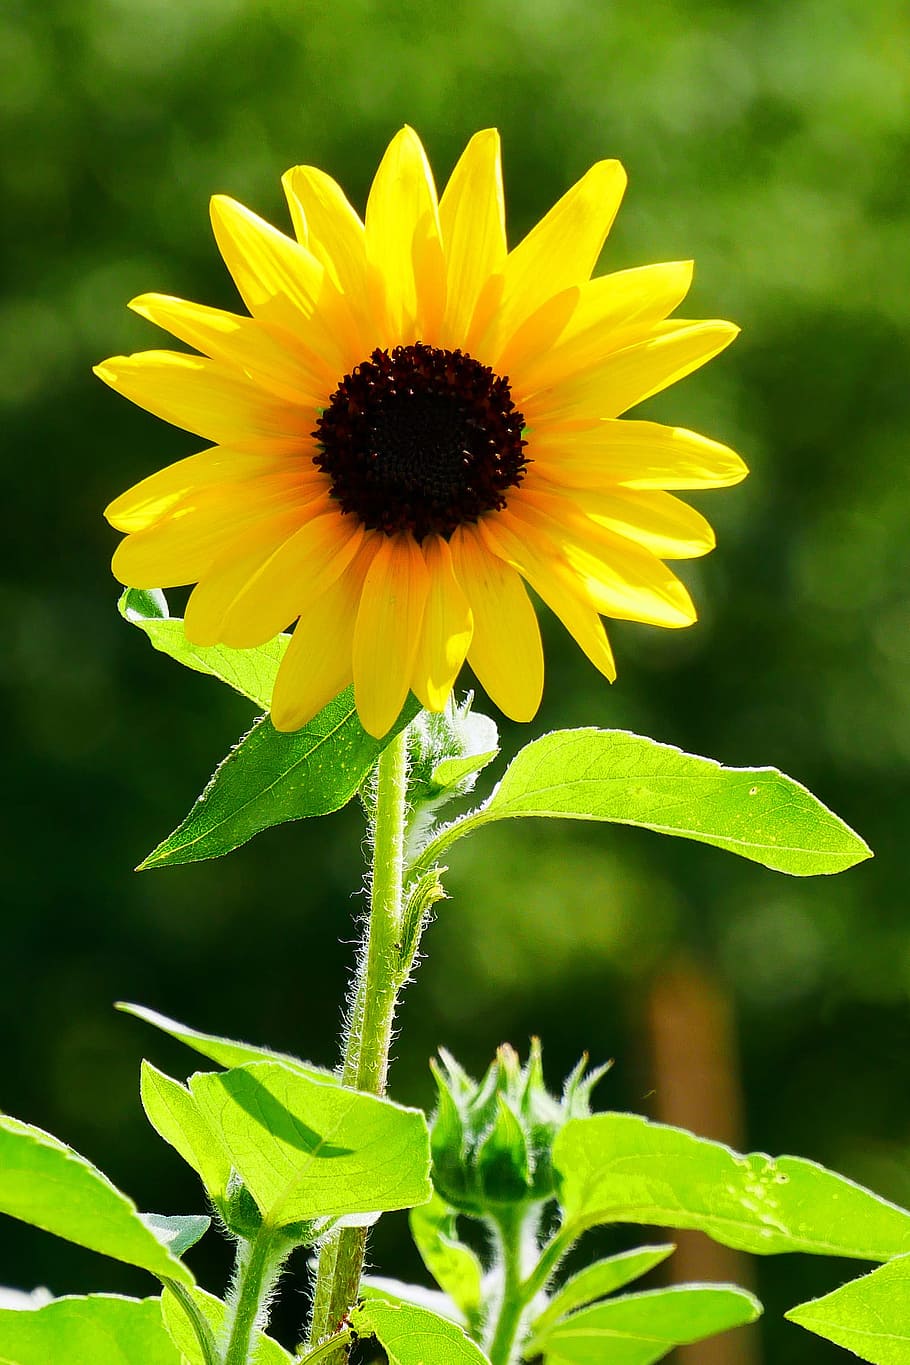 Giant flowers of the annual sunflower blooming in a sunny garden.